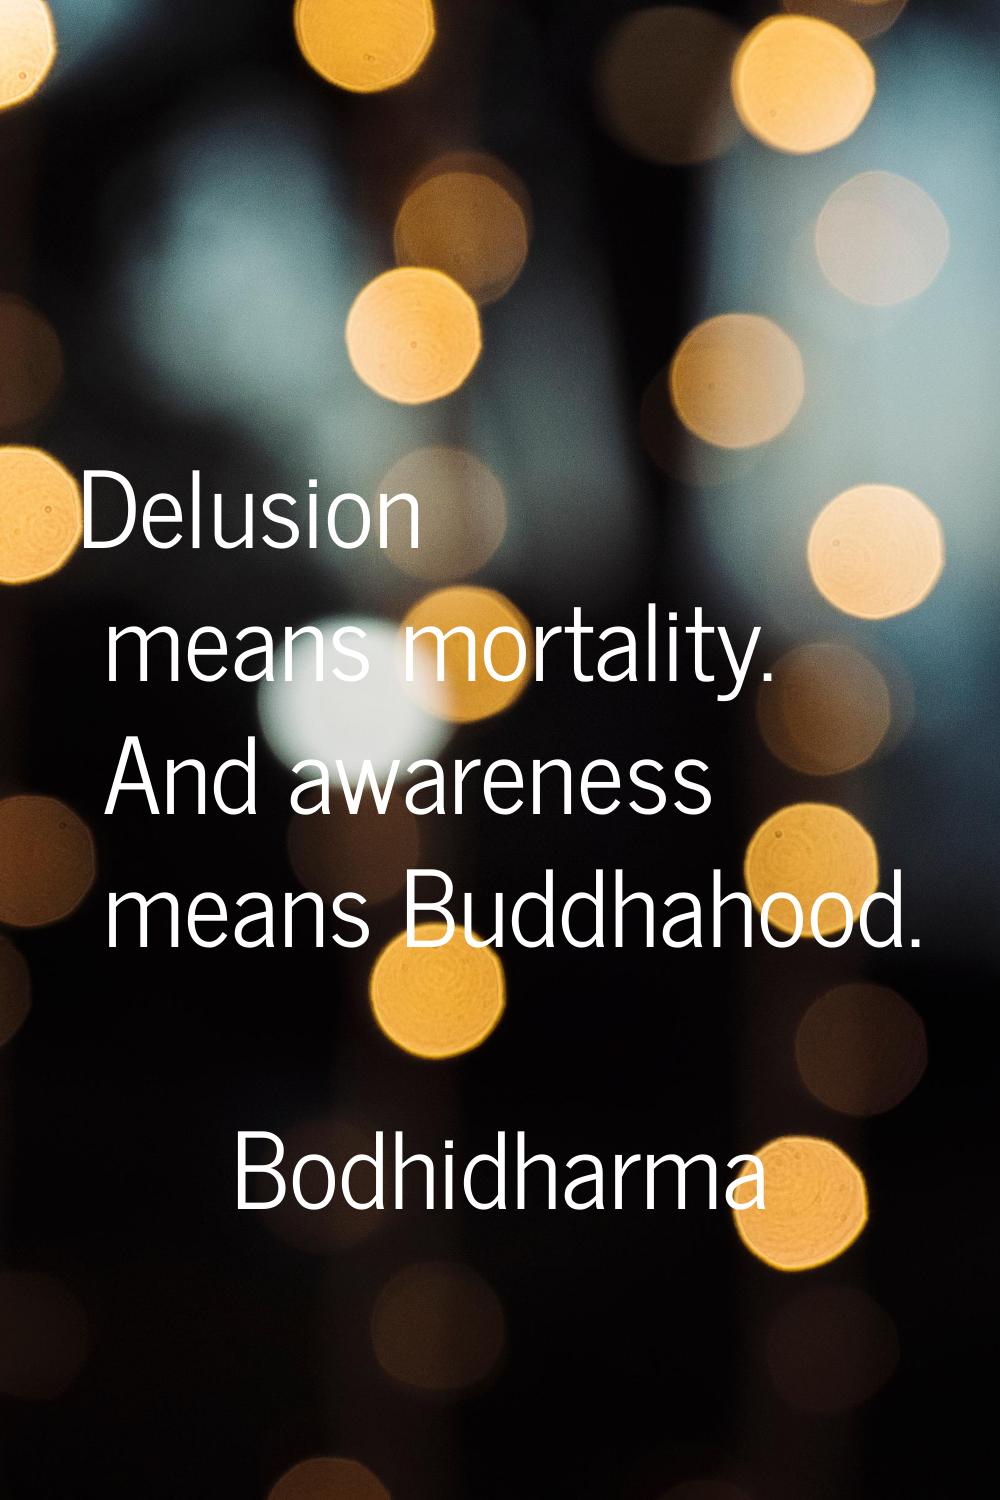 Delusion means mortality. And awareness means Buddhahood.